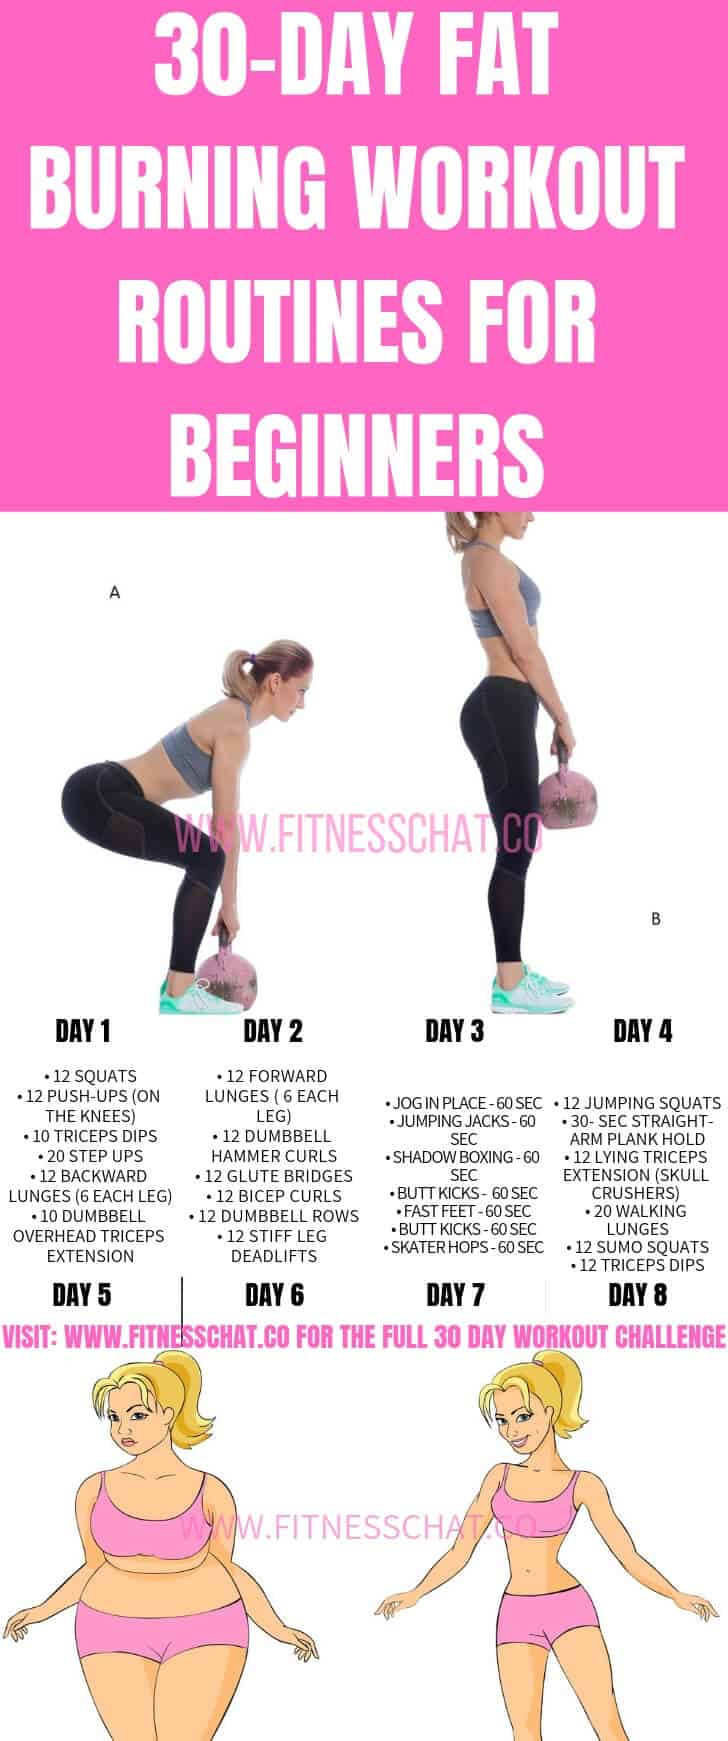 Fat Burning Workout For Women At Home
 30 Day Fat Burning Workout Routines for Beginners